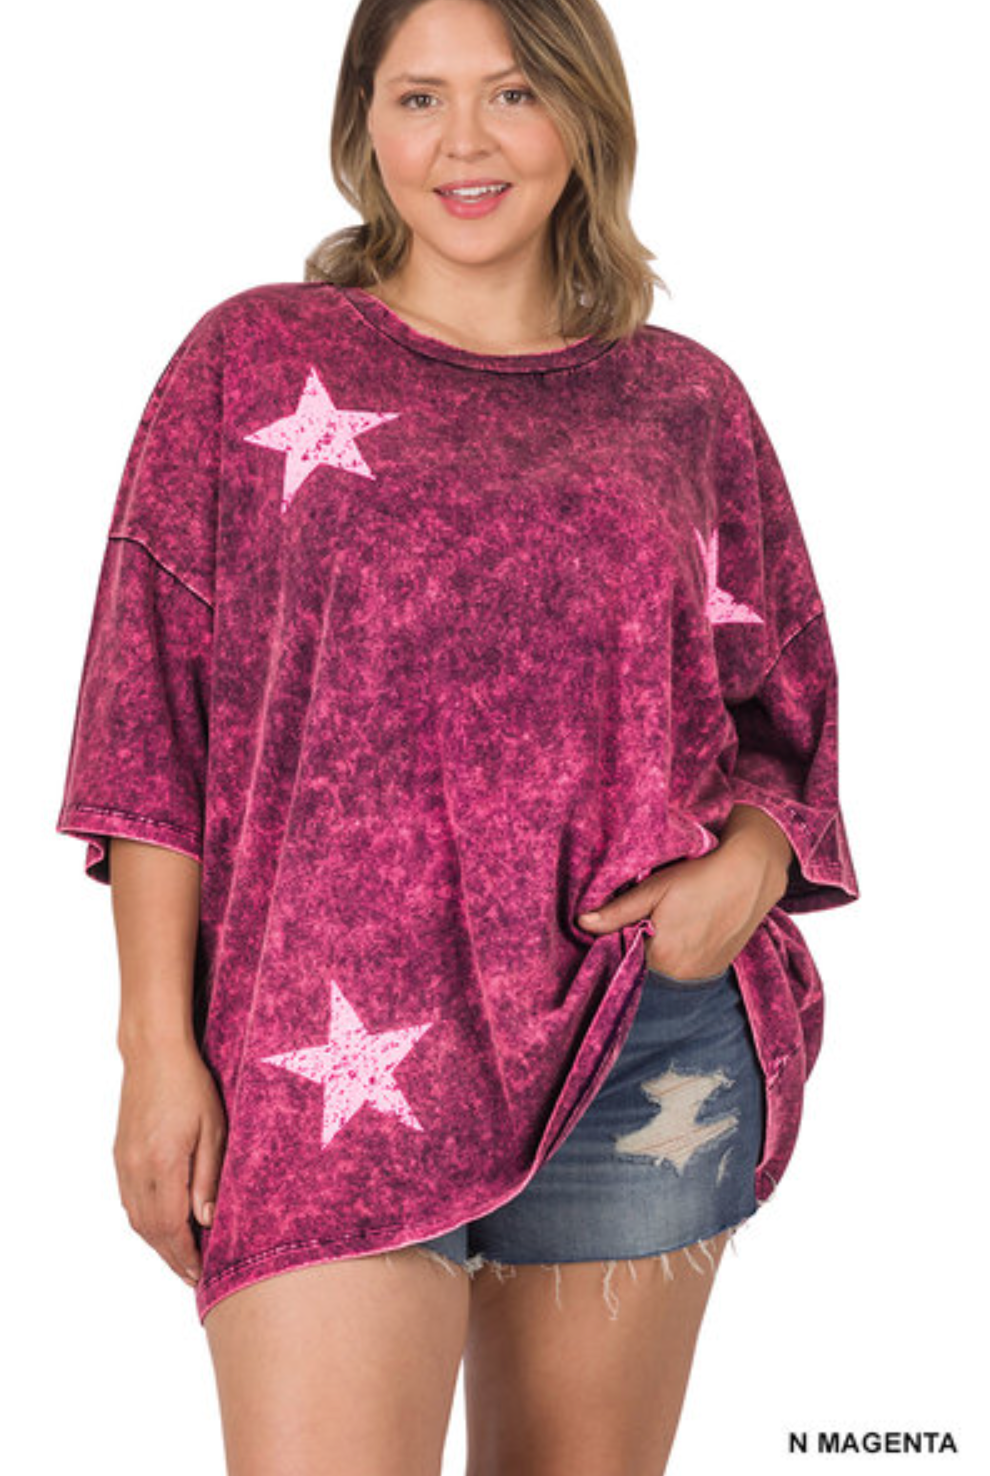 The Stars the Limit Mineral Washed Oversized Top